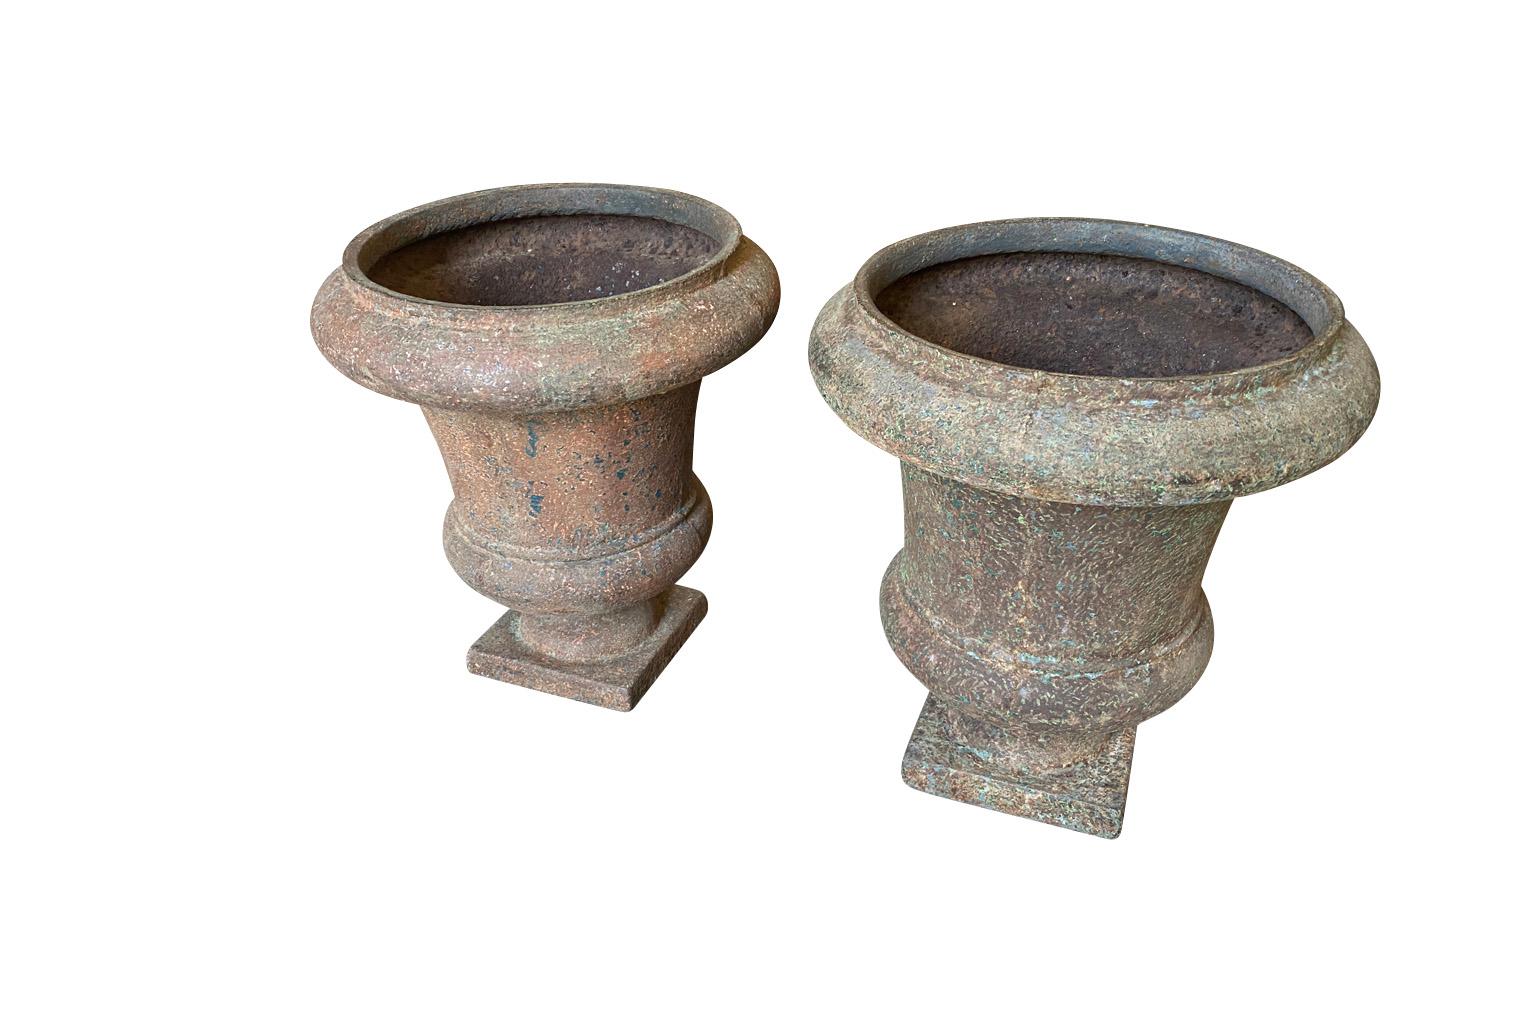 An exceptional pair of mid-18th century Medici Urns from the Provence region of France. Beautifully crafted from iron with stunning minimalist lines. Very weighty and excellent quality. Stunning patina.